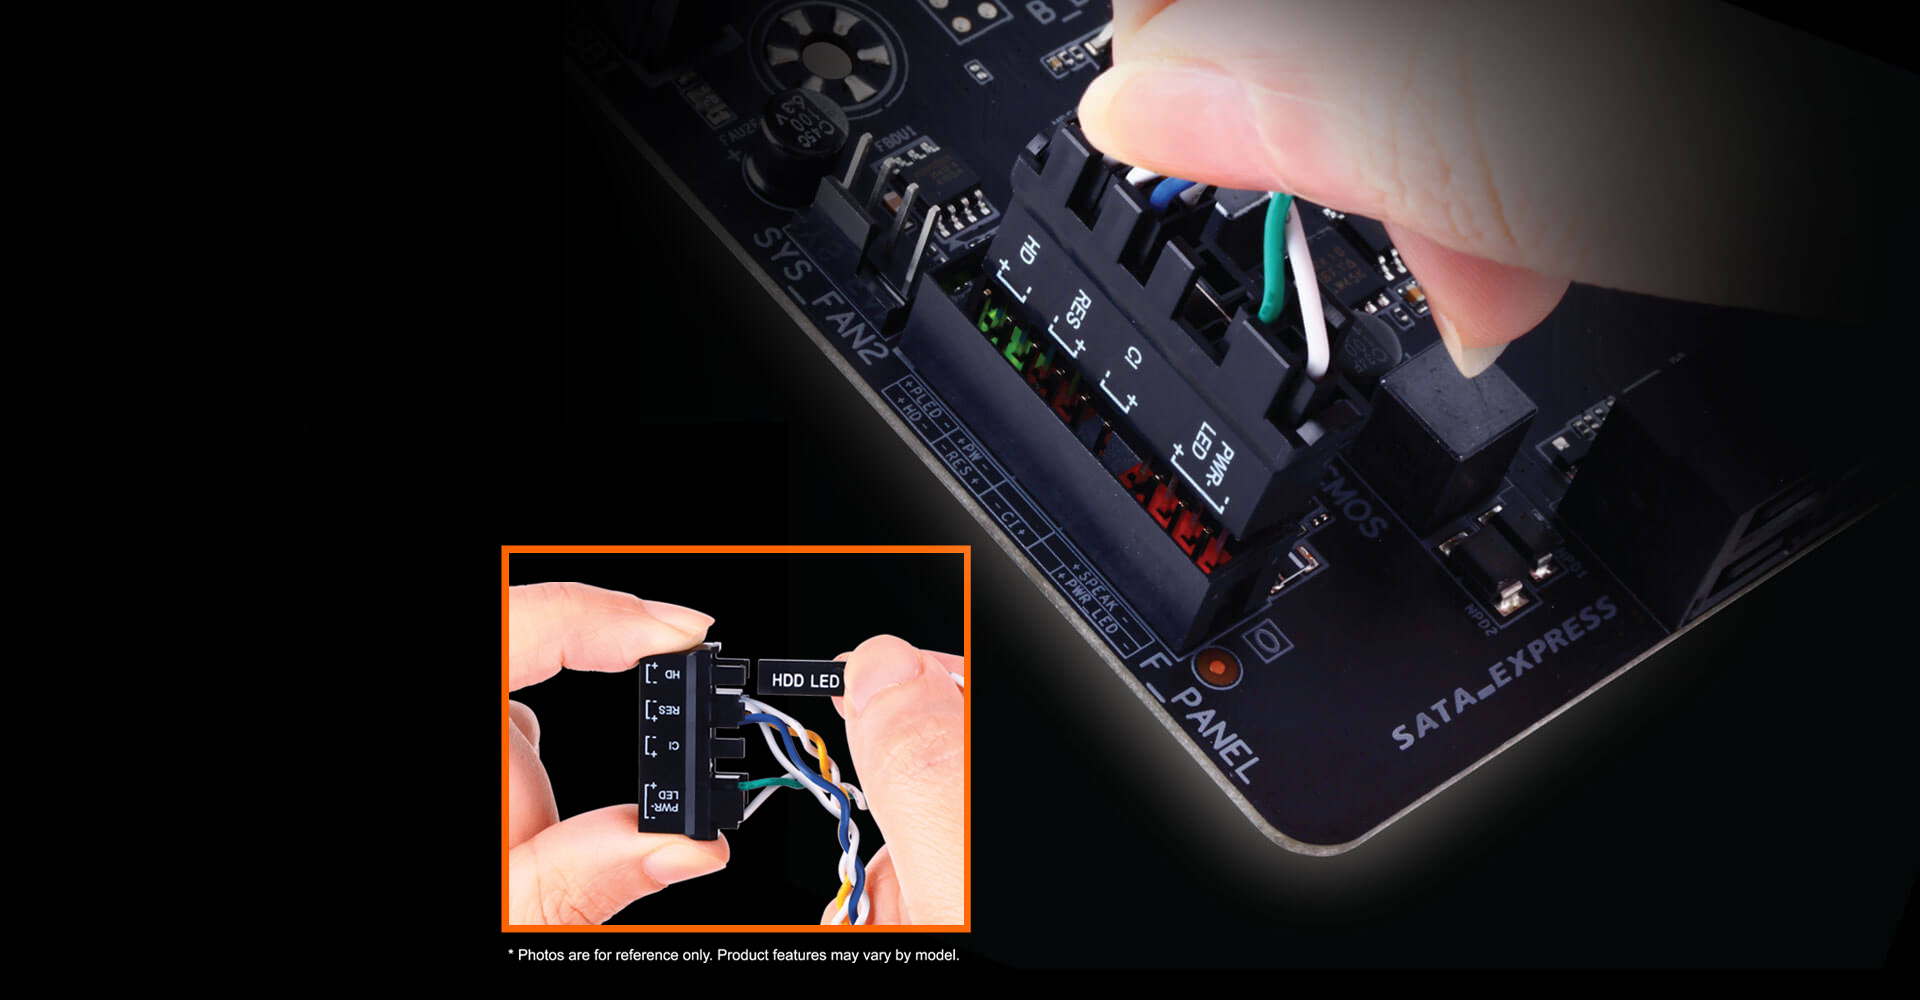 Z390 Motherboard with HDD LEDs Power Pins Being Plugged In